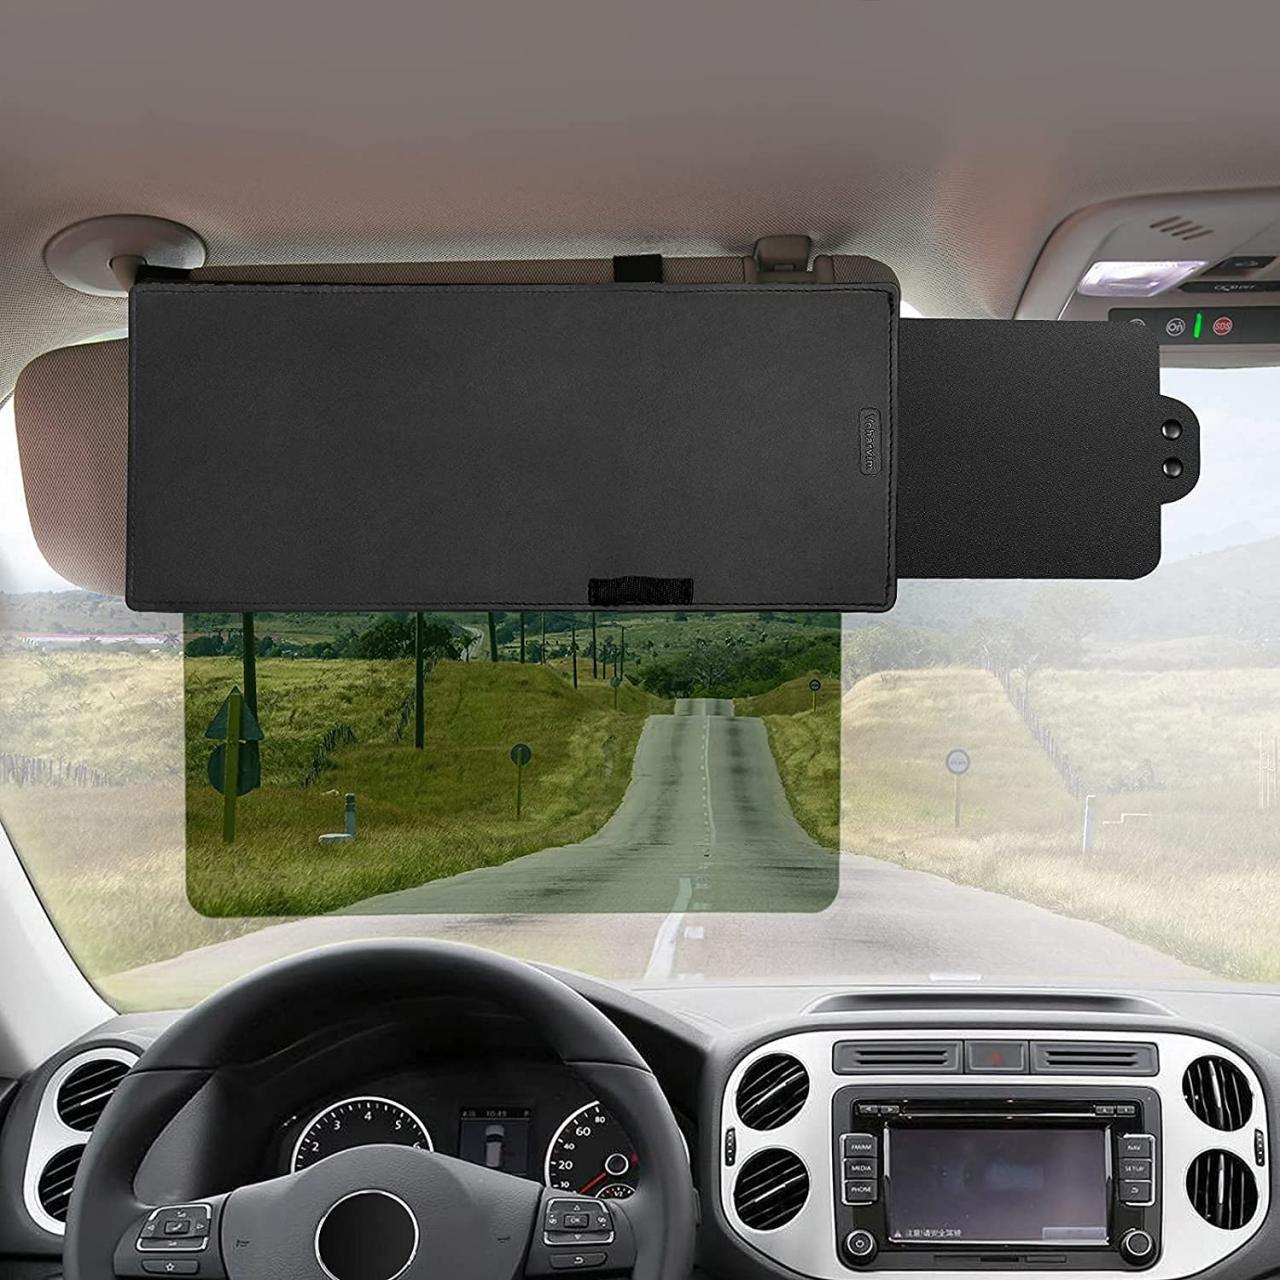 Buy Polarized Sun Visor for Car with Polycarbonate Lens, Car Sun Visor  Extension and Side Sunshade, Anti-Glare Protects from Sun Glare, UV Rays,  Foggy Day, Universal for Cars, SUVs Online in Hong